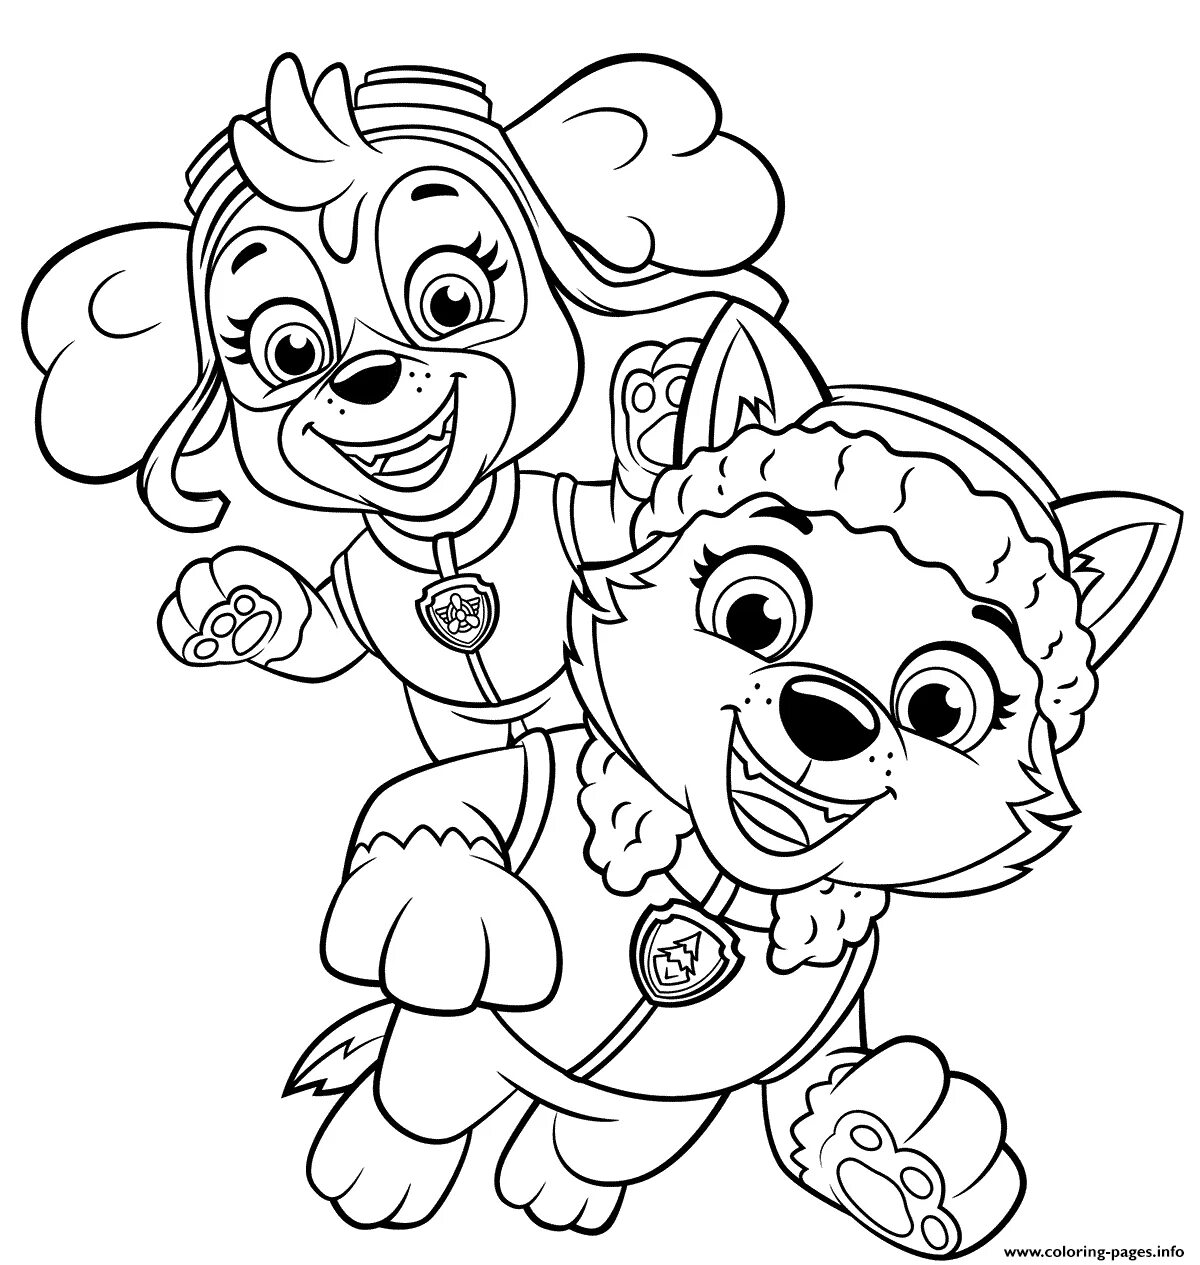 Coloring page magnanimous everest and sky